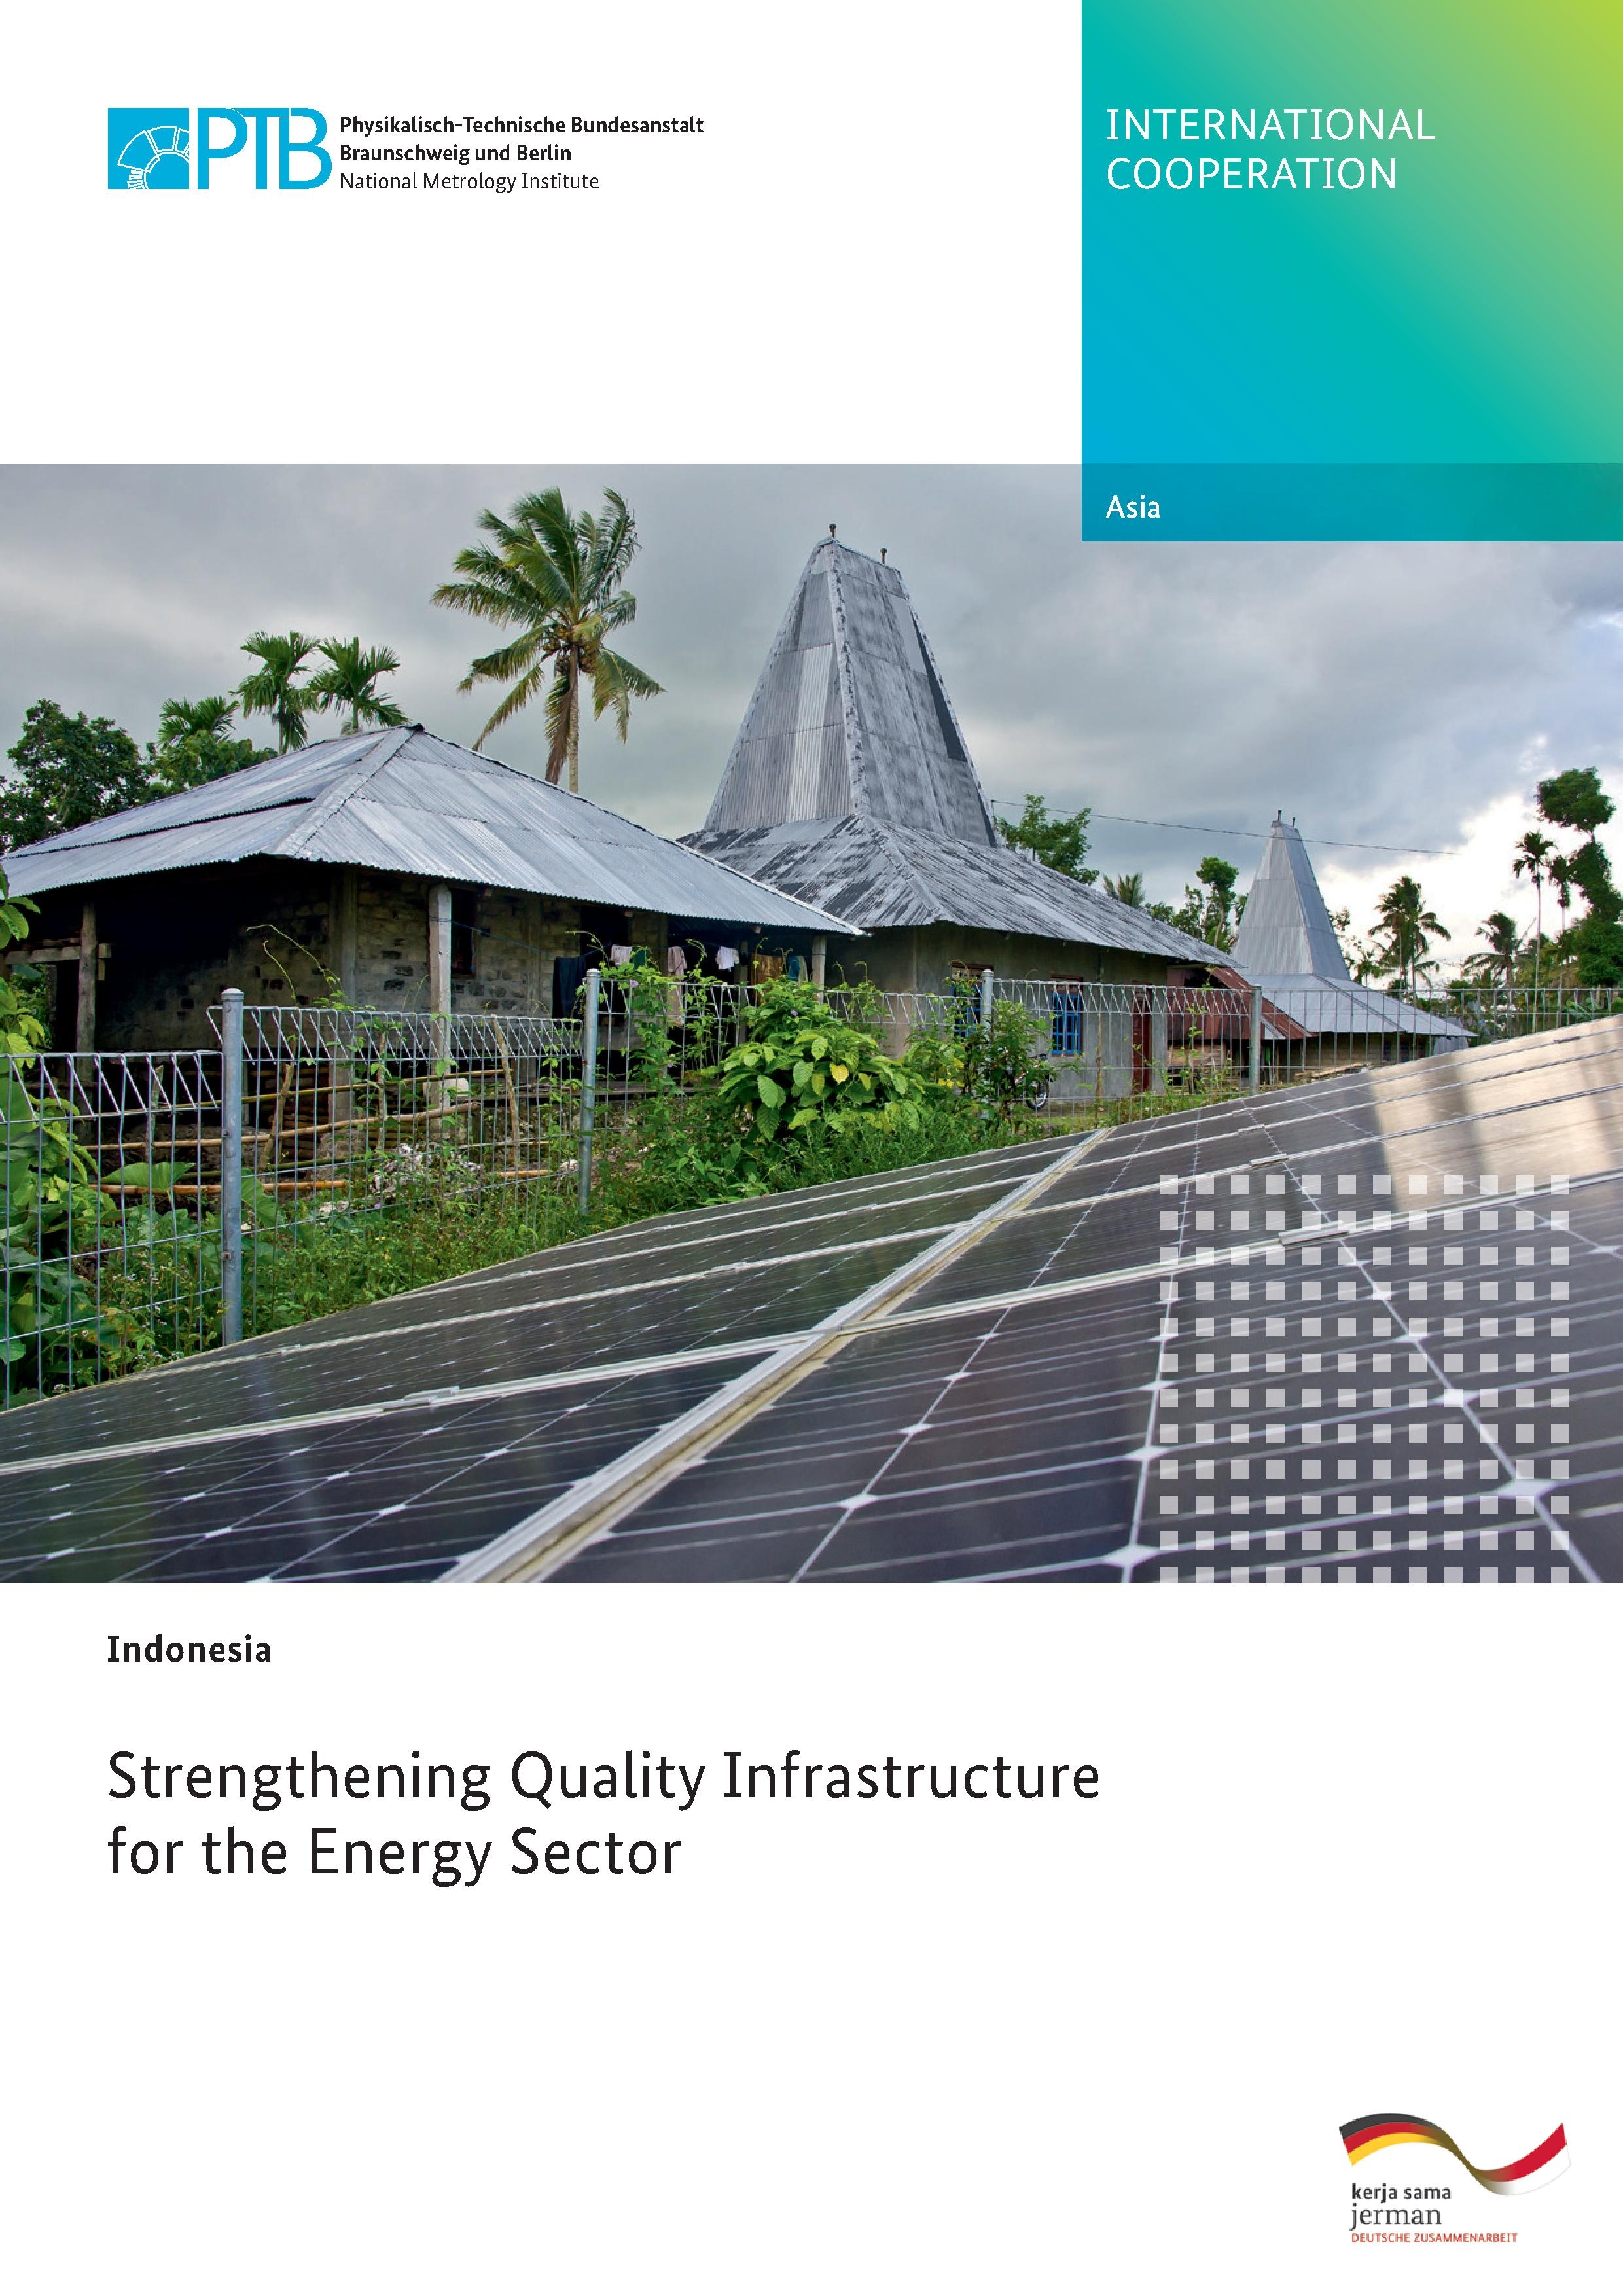 project to strengthen the quality infrastructure